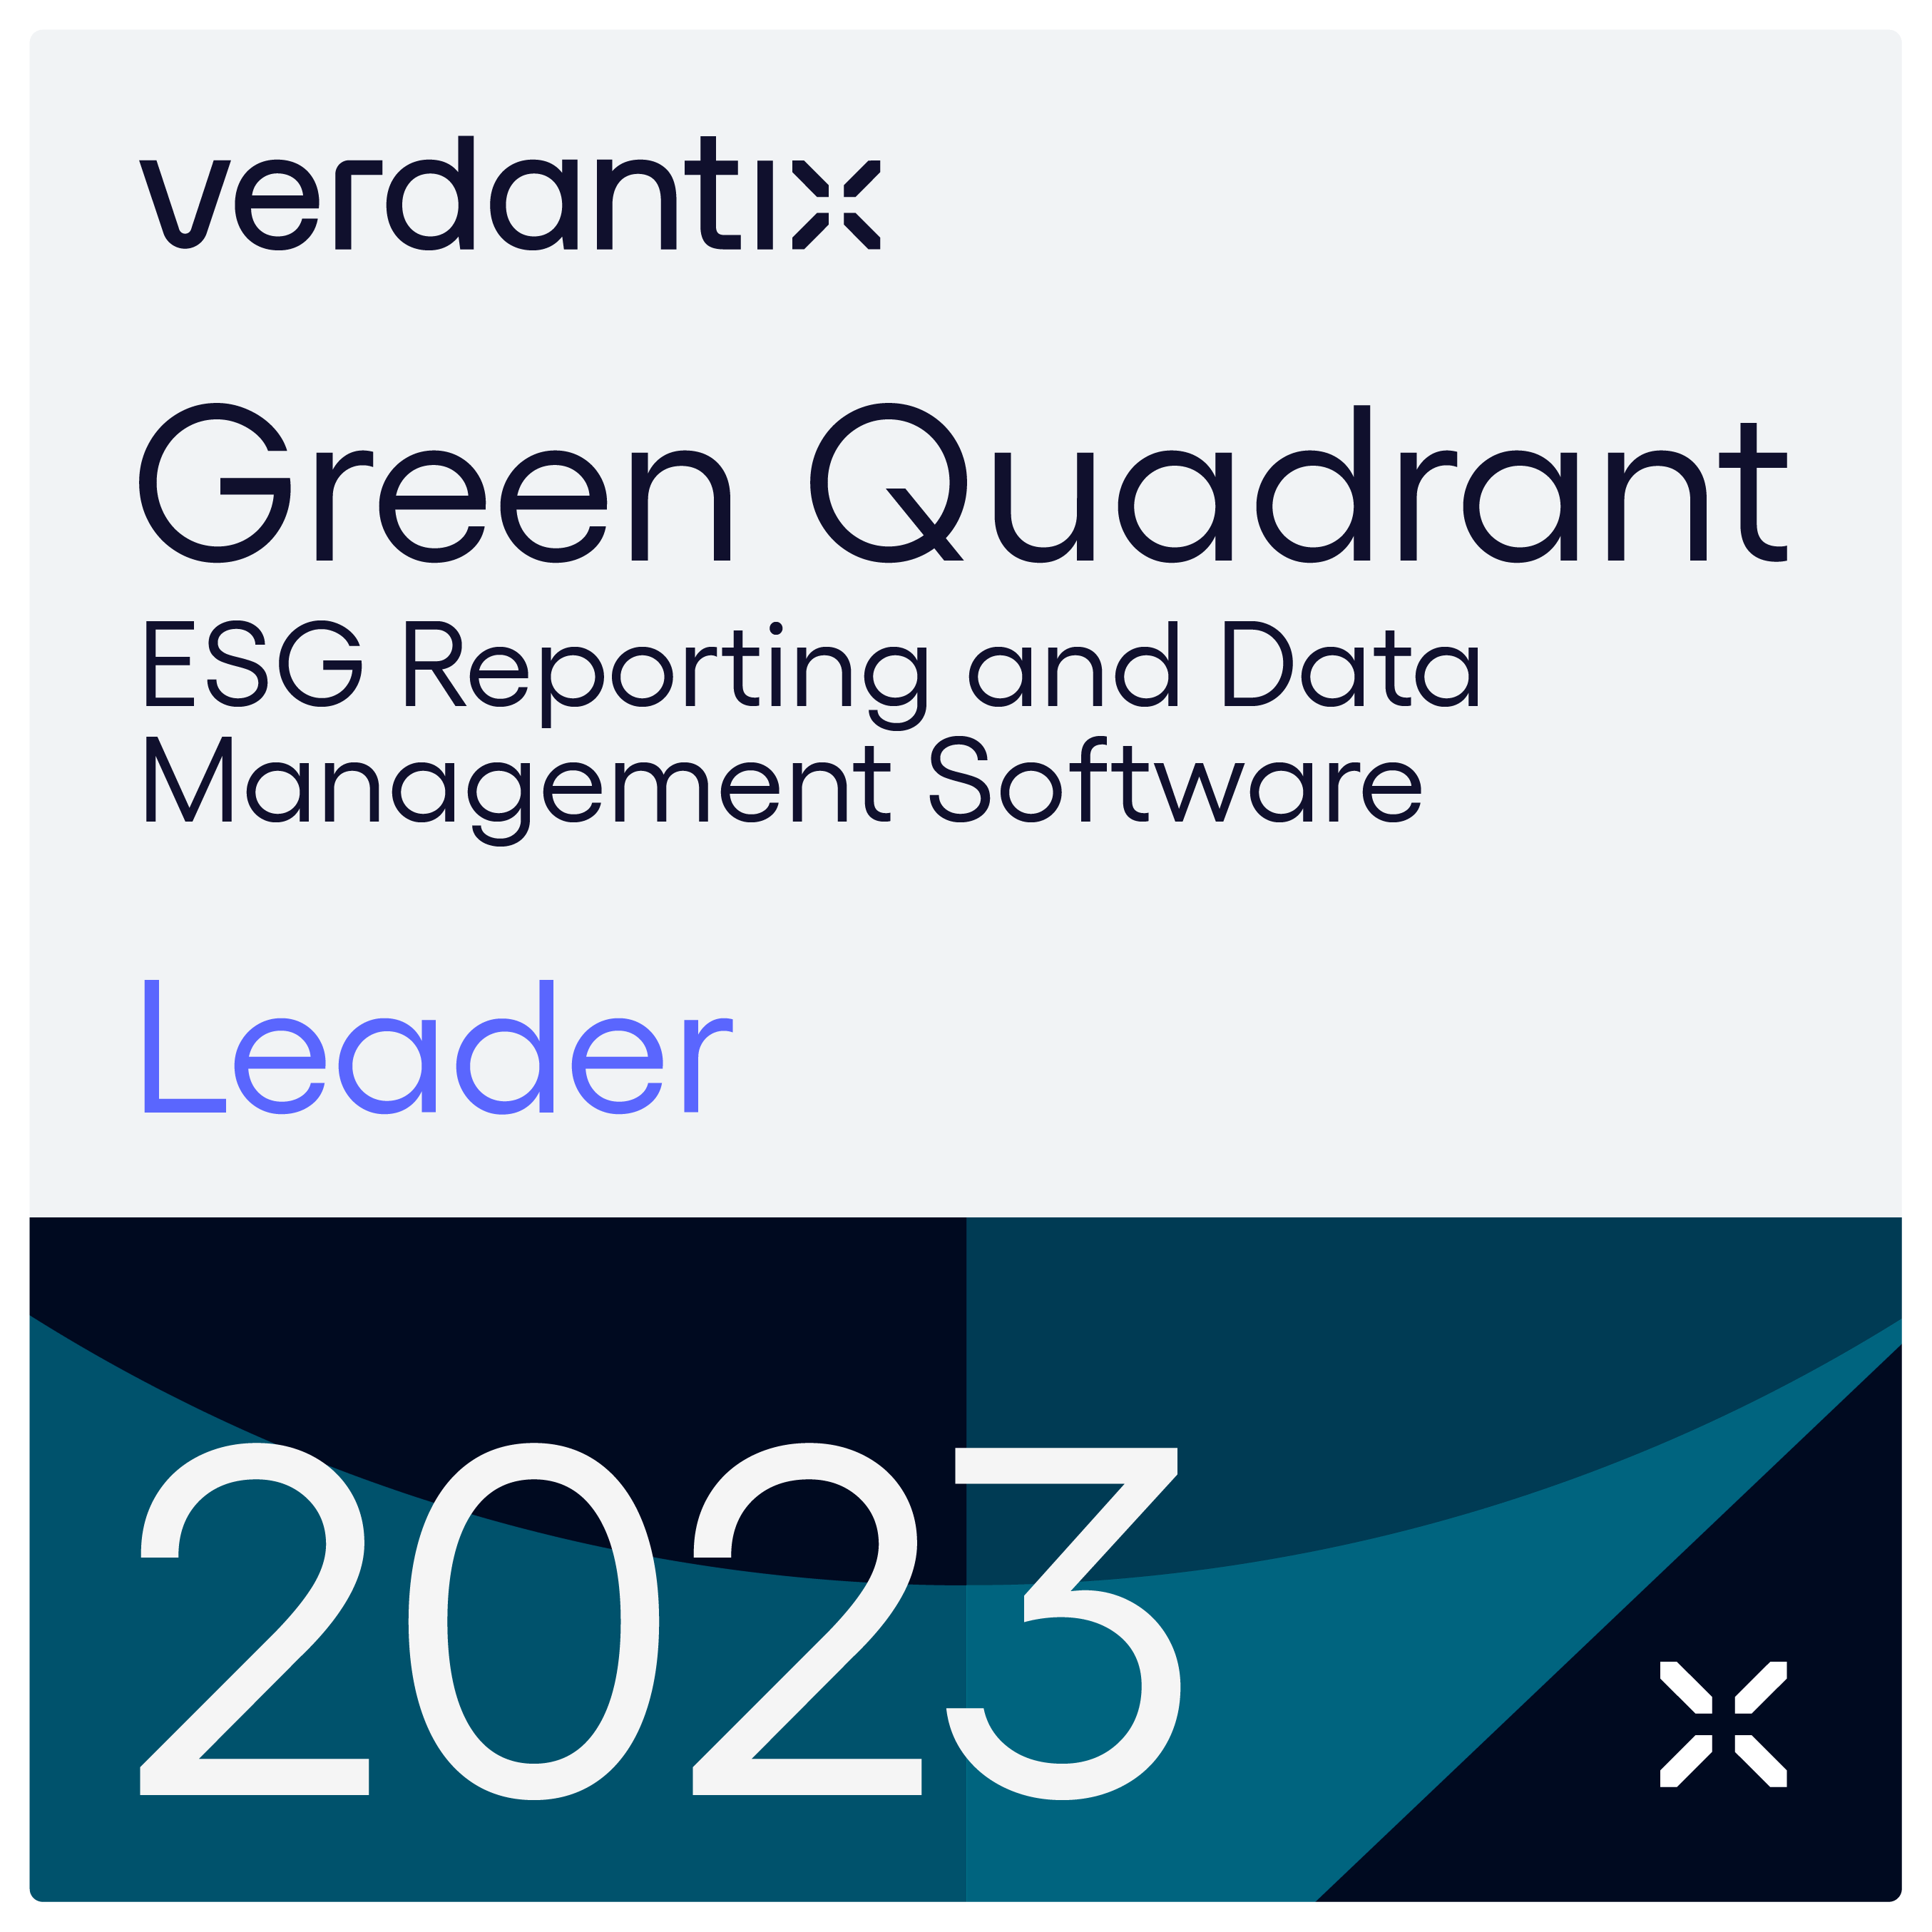 Cority Recognized as a Leading Provider  for ESG Reporting and Data Management Software